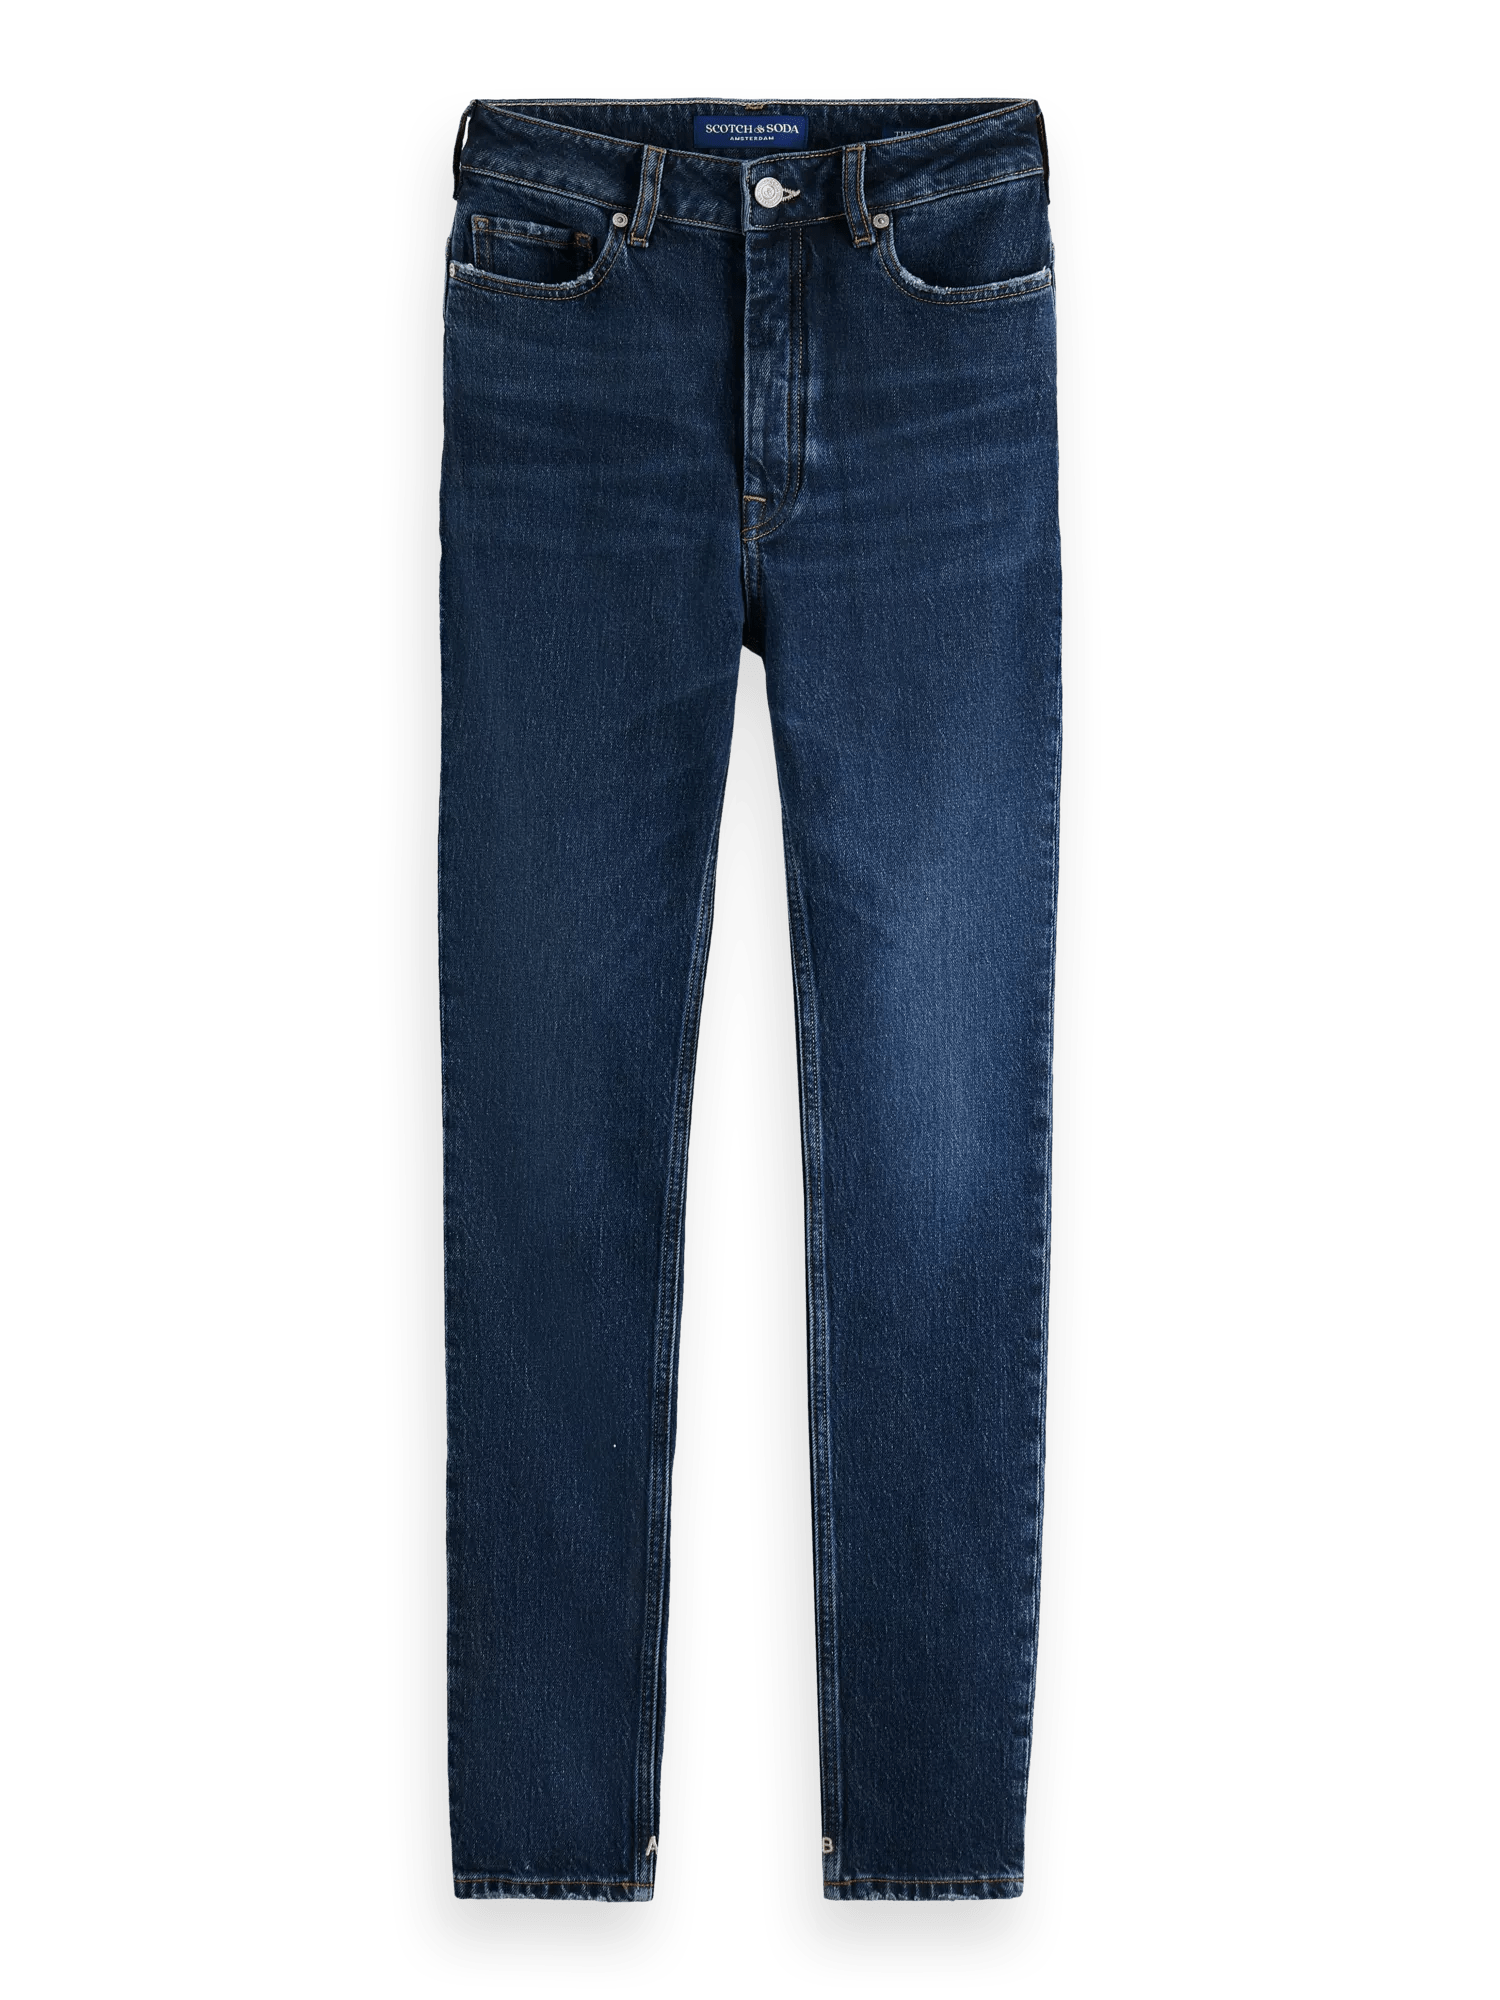 Scotch & Soda The Line high-rise skinny fit jeans FNT